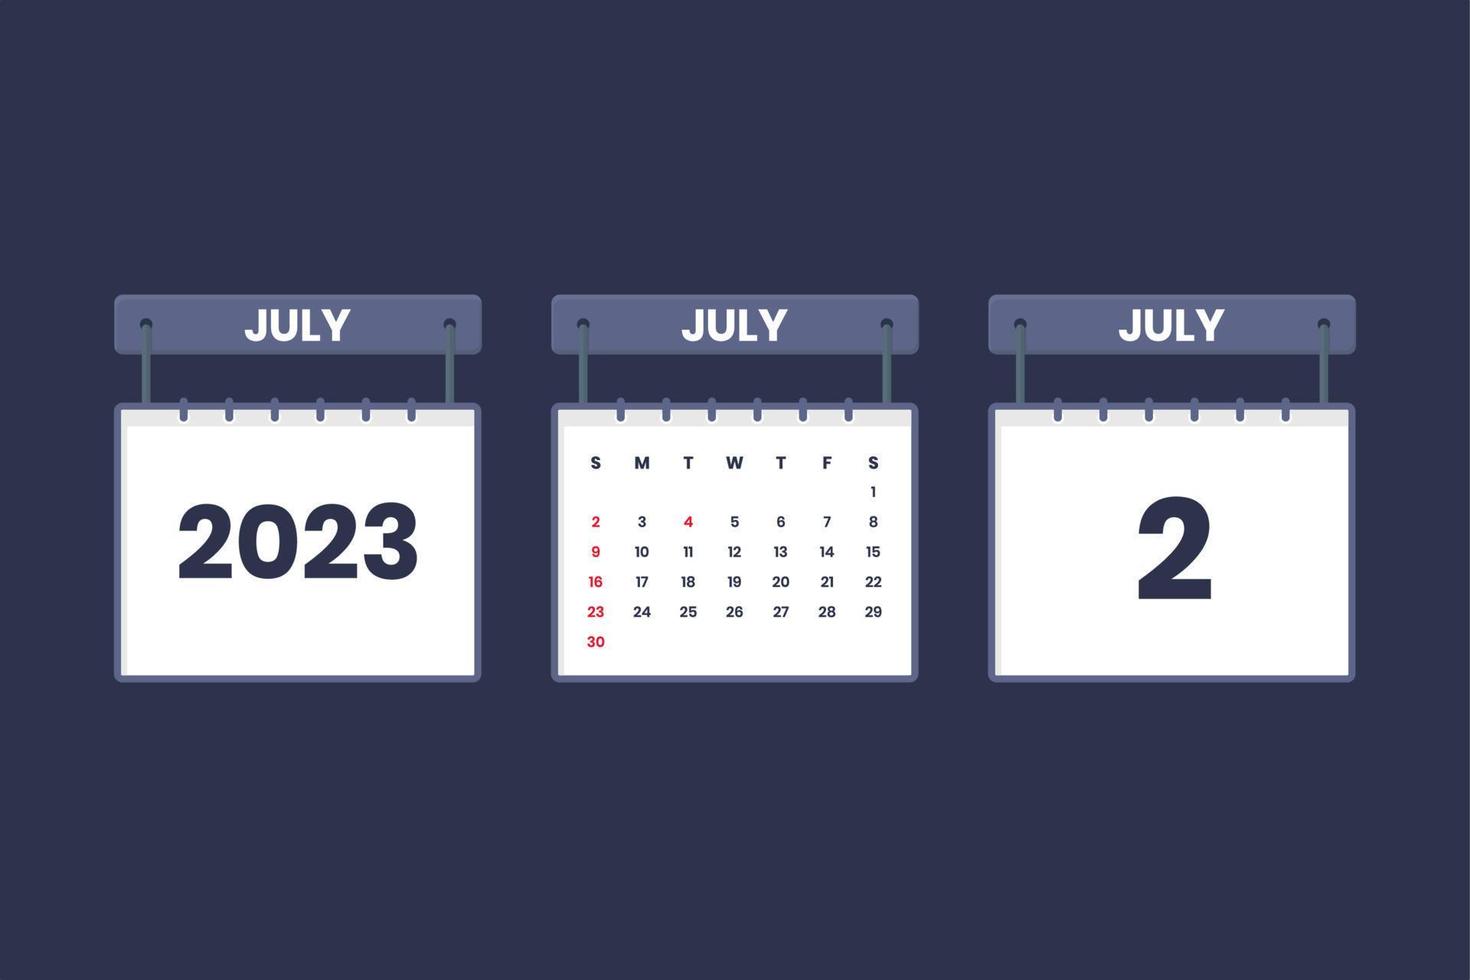 2 July 2023 calendar icon for schedule, appointment, important date concept vector